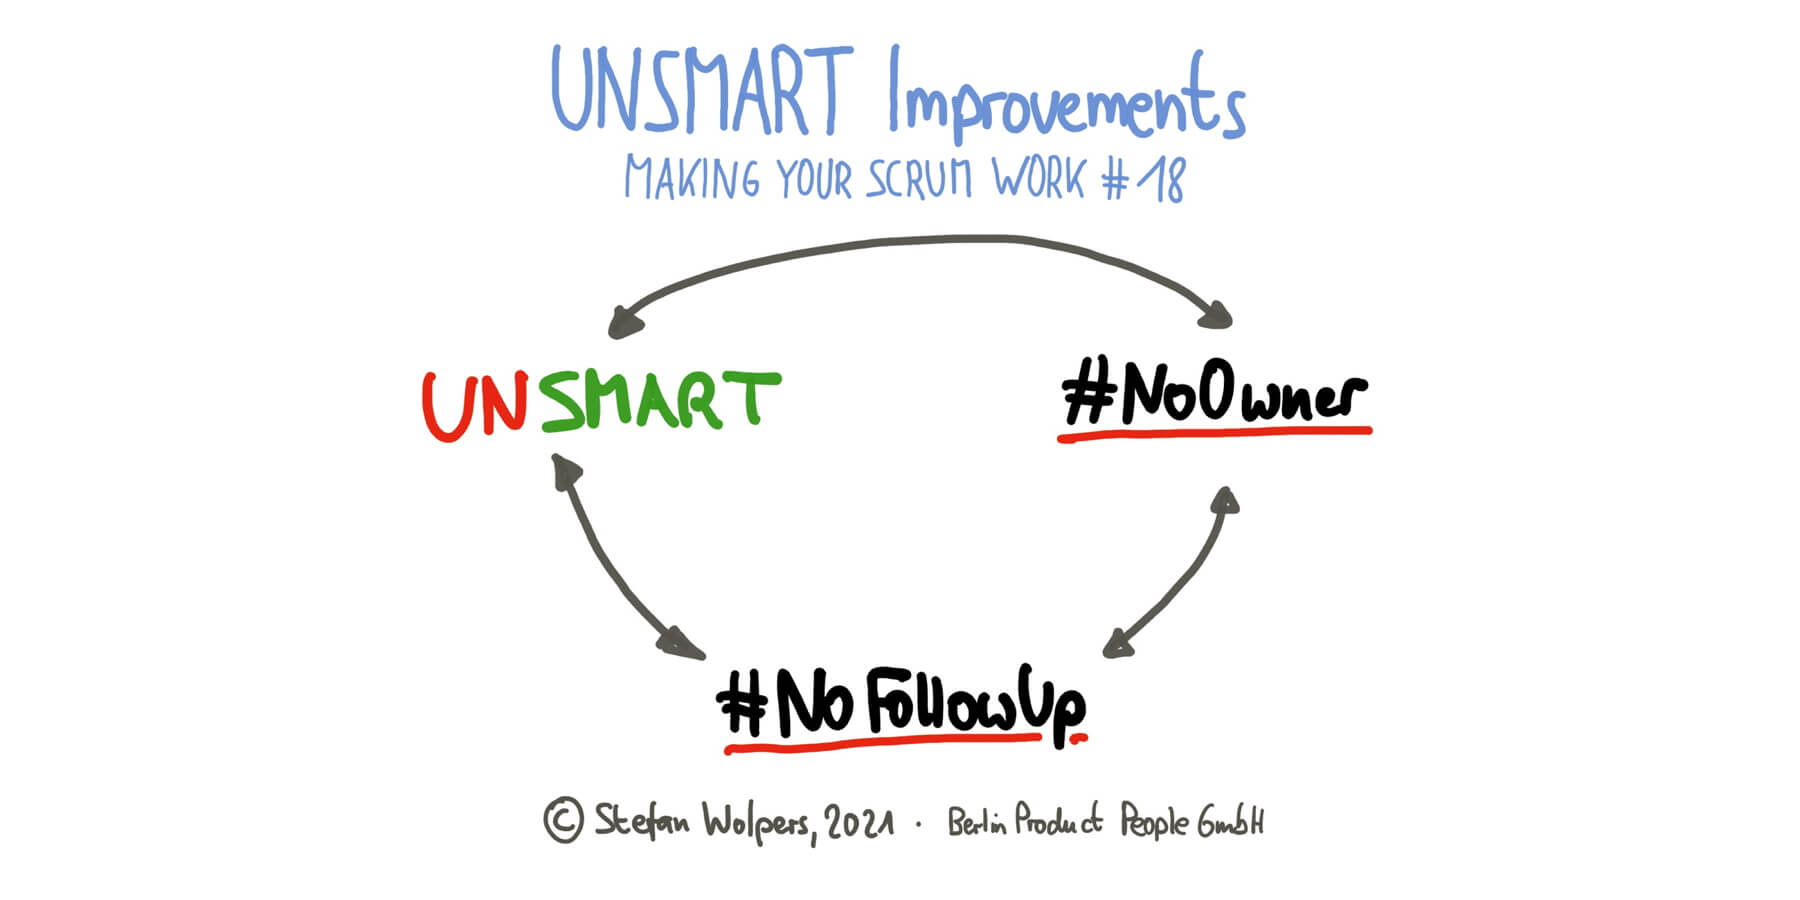 UnSMART Improvements at Retrospectives — Making Your Scrum Work #18 — Berlin Product People GmbH